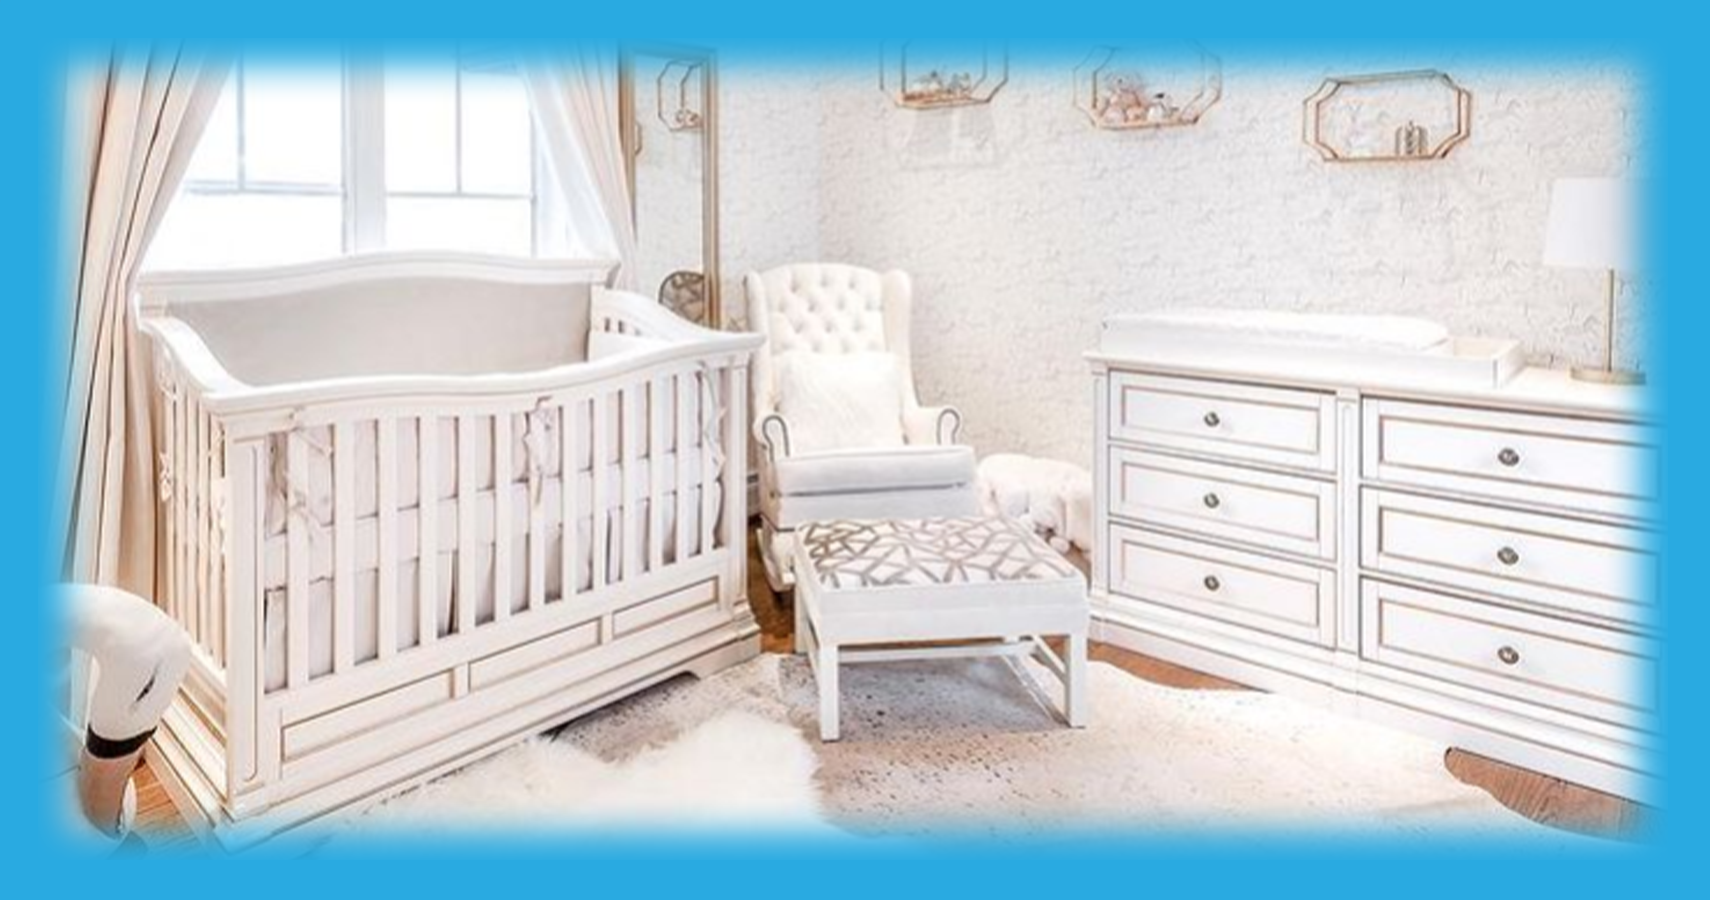 The Most Beautiful Celebrity Nurseries To Inspire Your Own Baby's Room